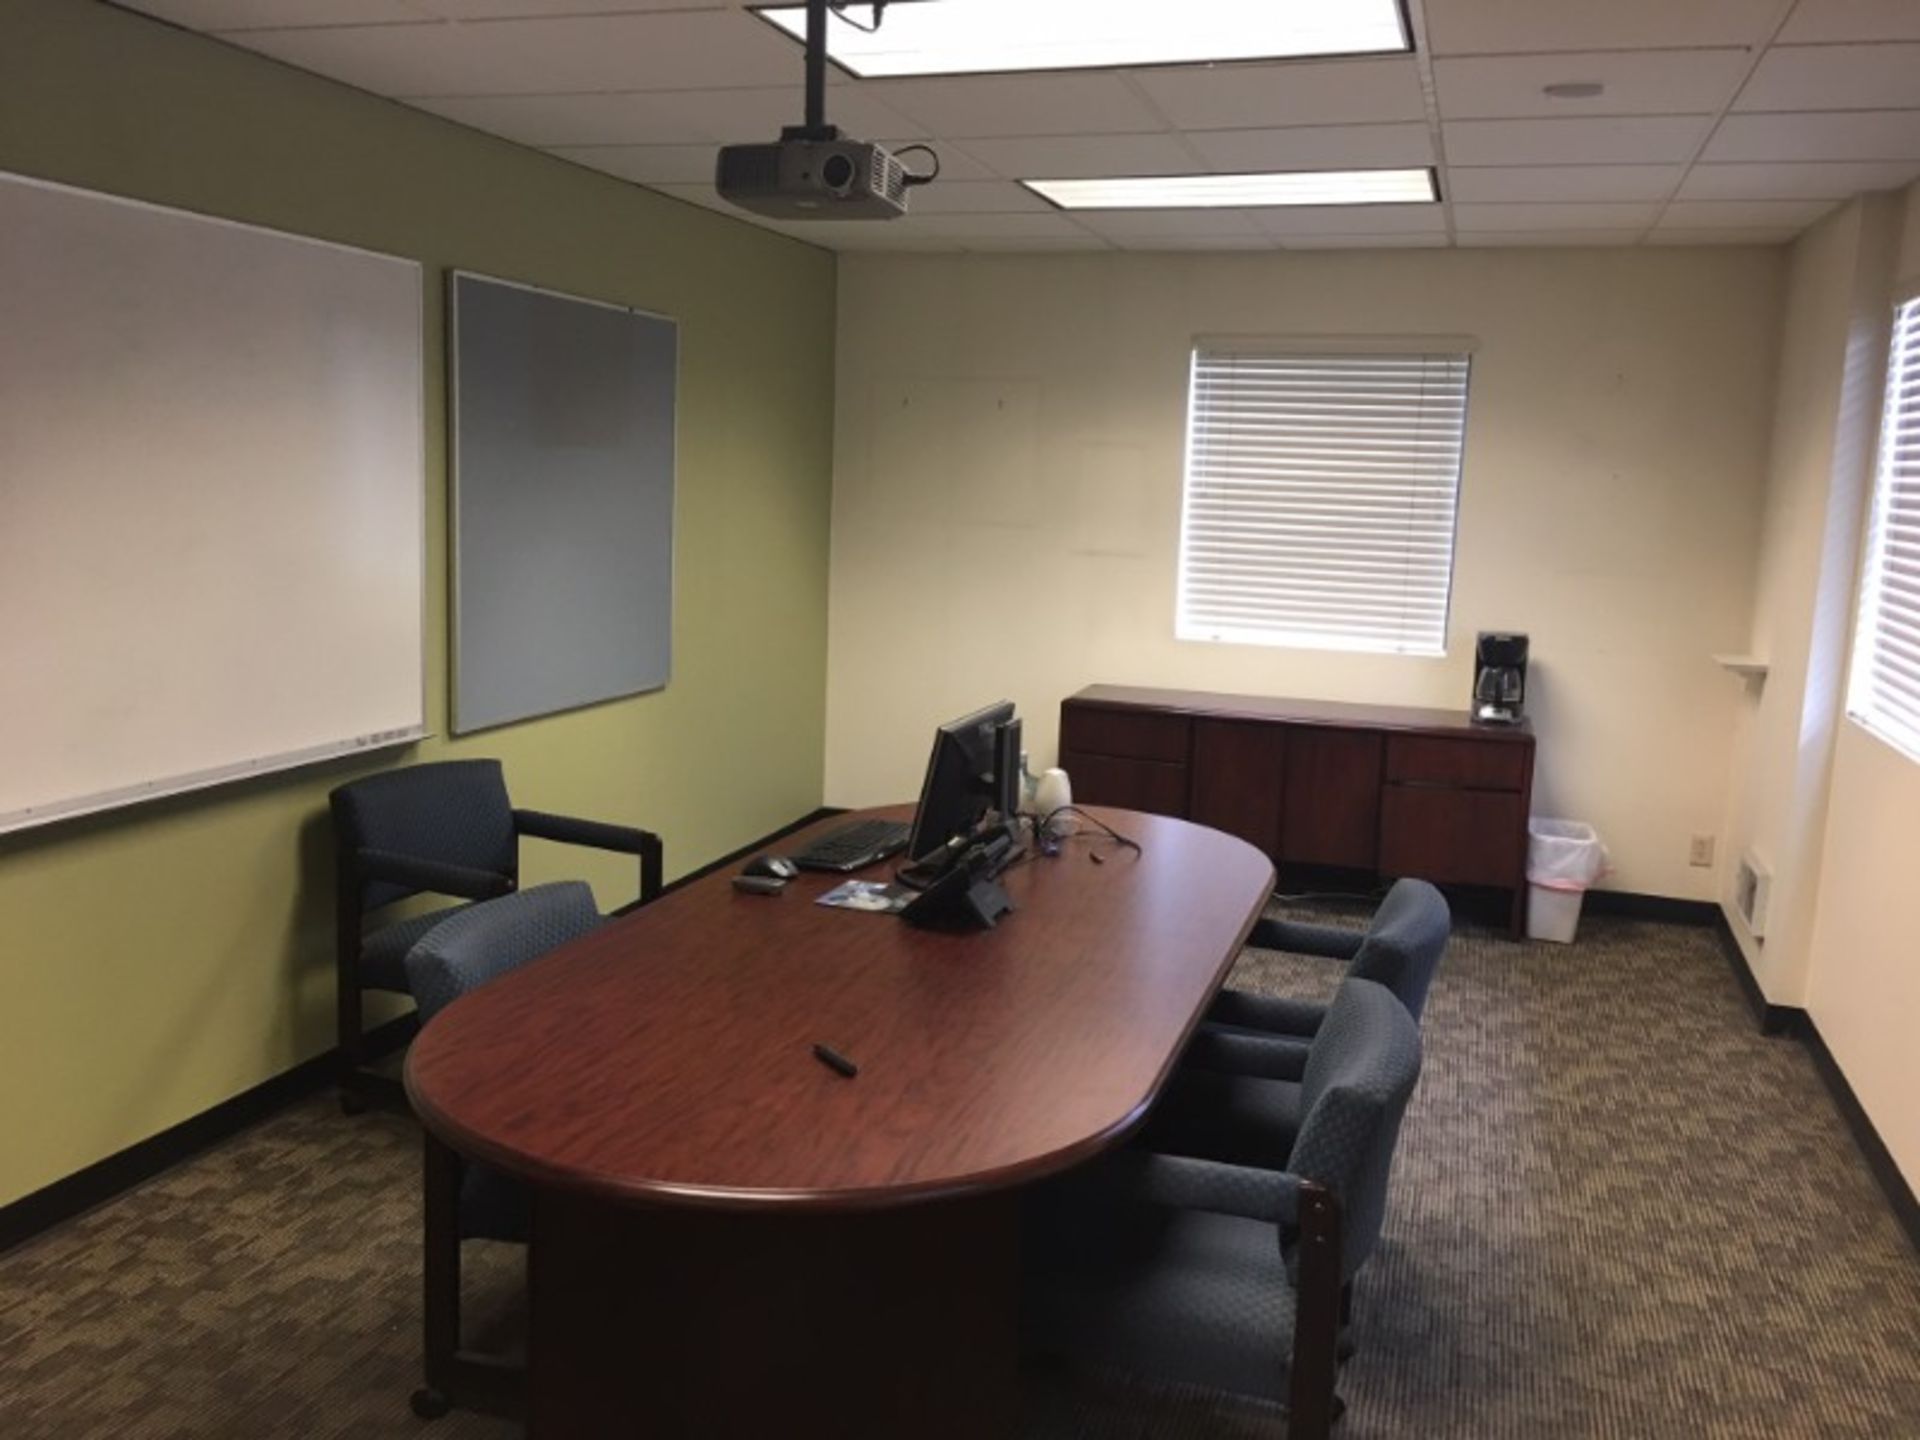 Room Content, Conference Table with Chairs & Projector - Image 8 of 9